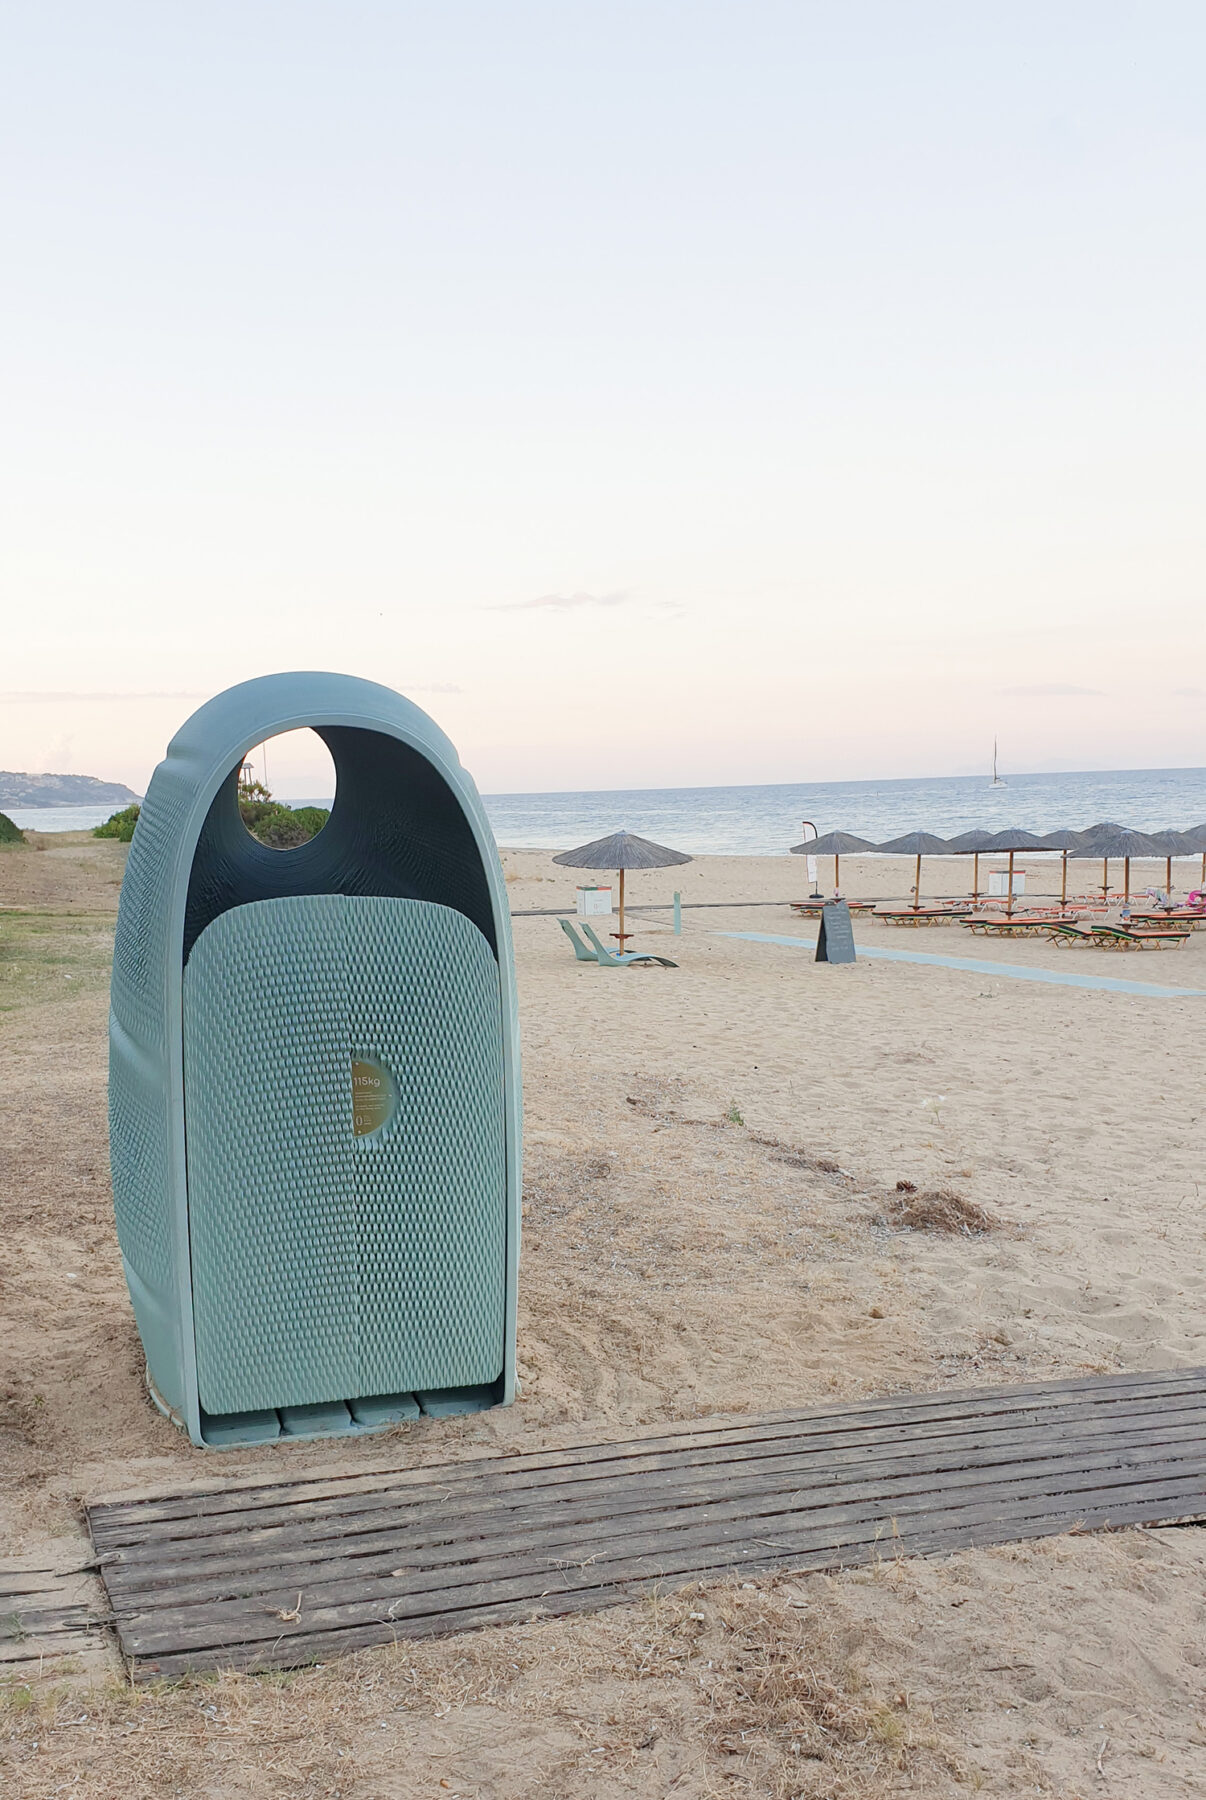 Archisearch THE ELEMENTS BY THE NEW RAW: crafting beach furniture from upcycled marine plastic waste in Greece